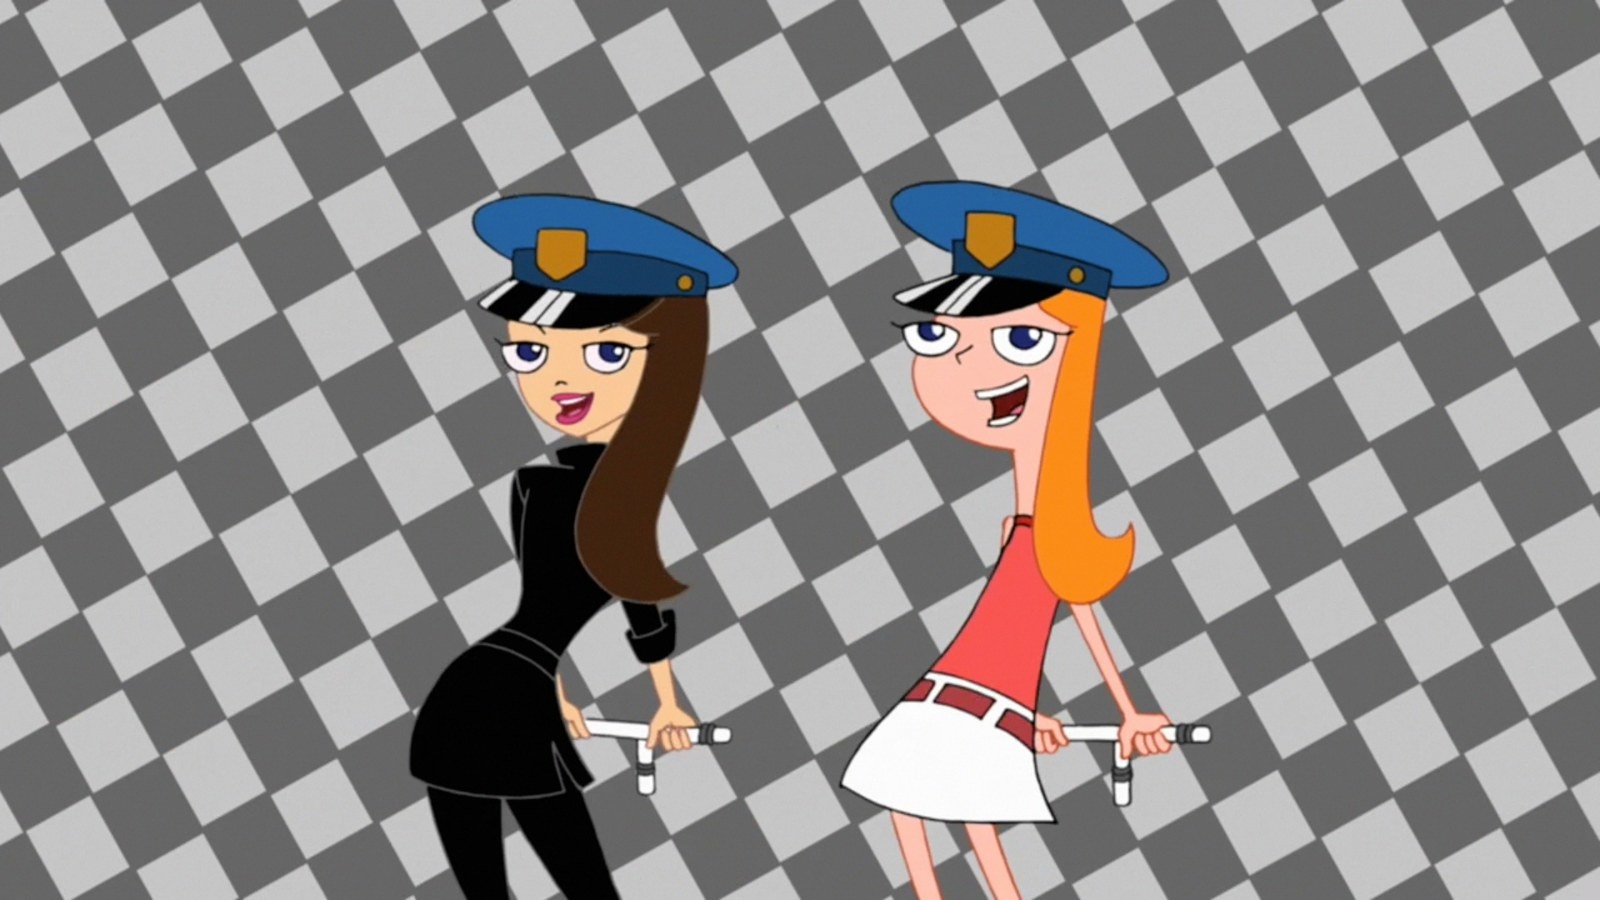 22. "Busted" from Phineas and Ferb. 